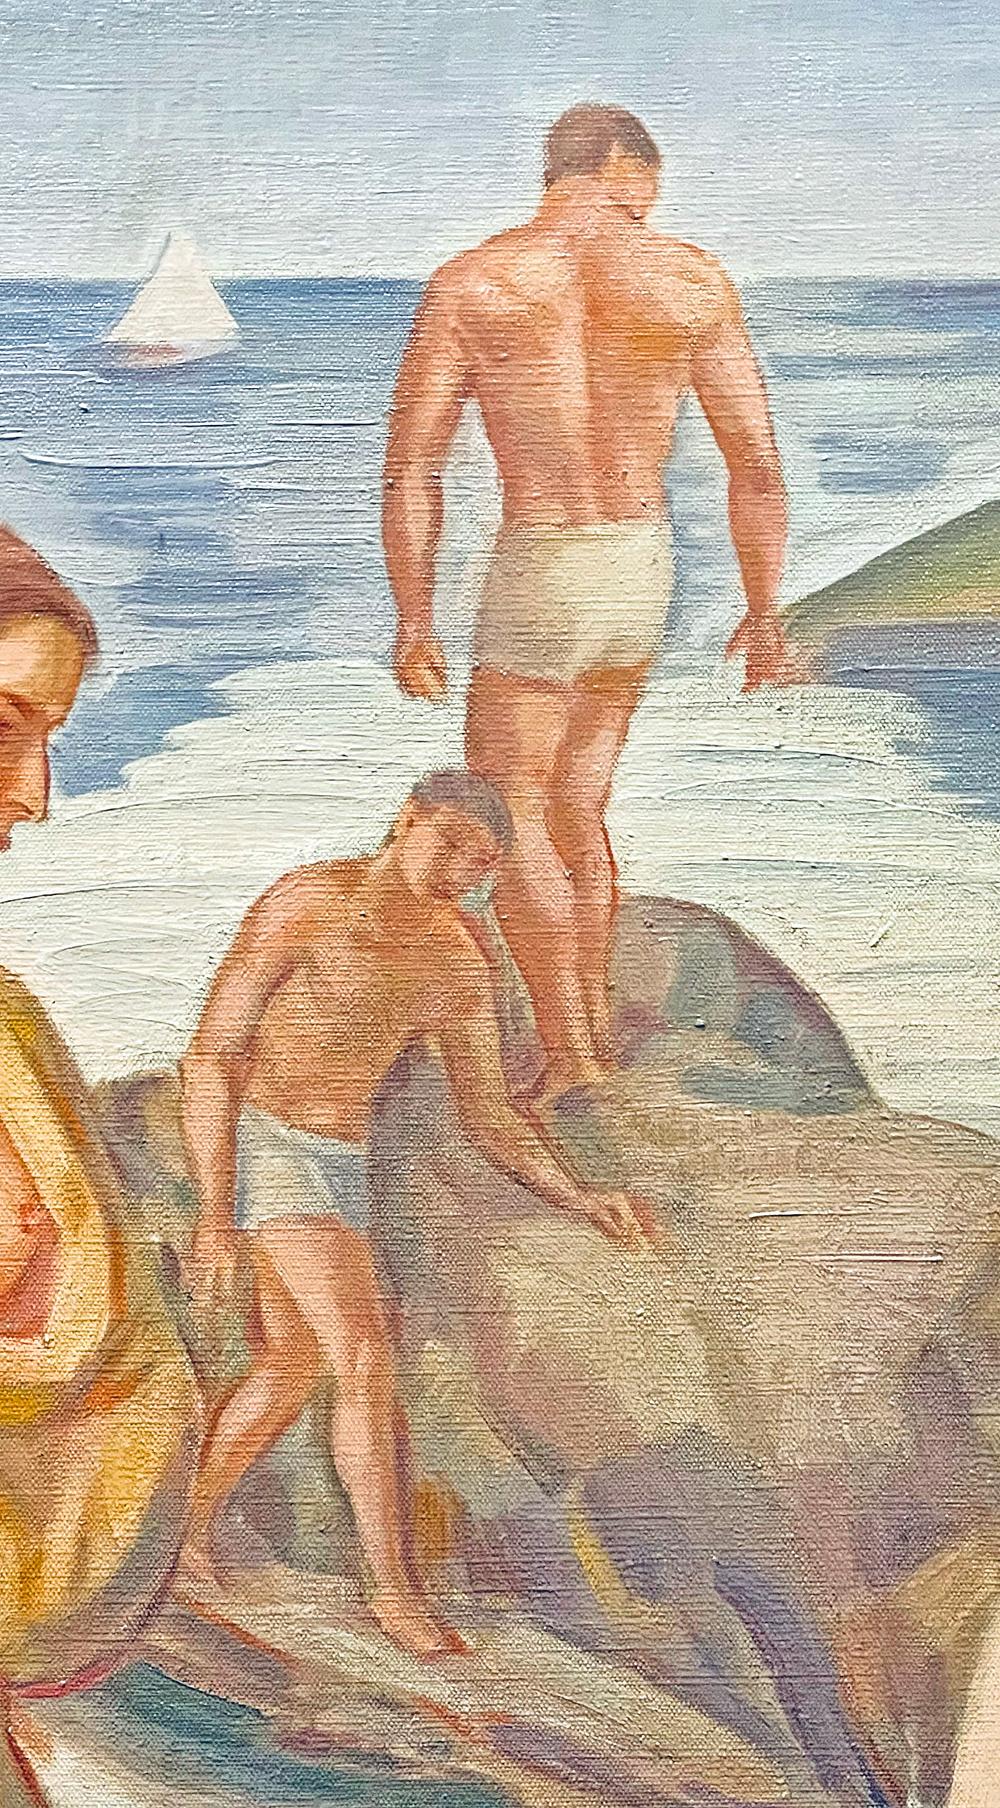 Beautifully painted in muted tones of honey, soft blue and dusty pink, this evocative painting from the 1930s depicts two nude and semi-nude female figures along the seashore, framing a pair of men in swimsuits clambering over rocks in the distance.